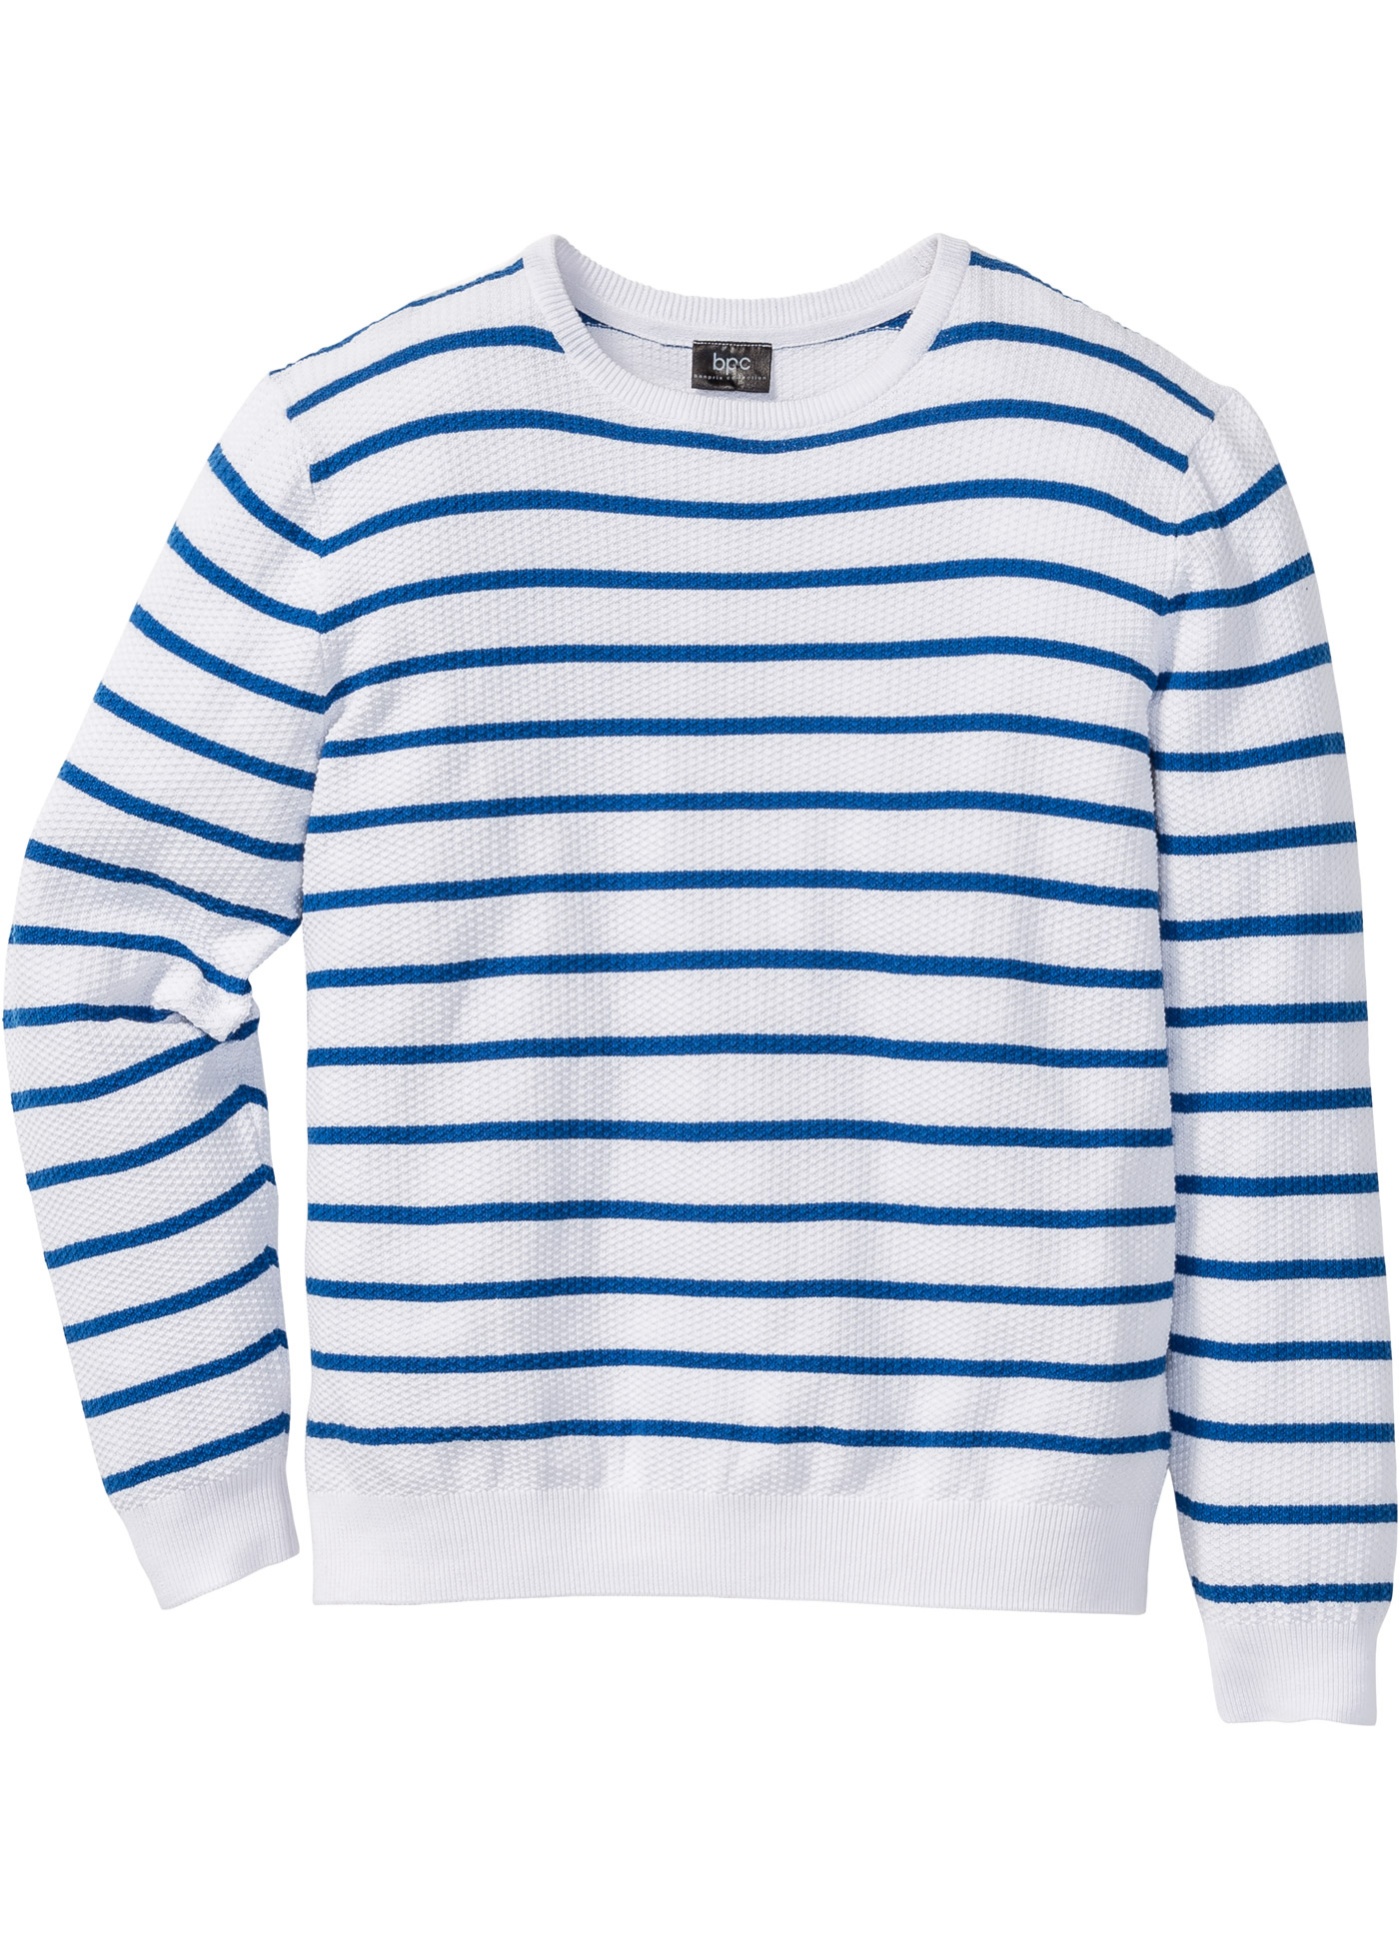 Pullover a righe regular fit (Bianco) - bpc bonprix collection